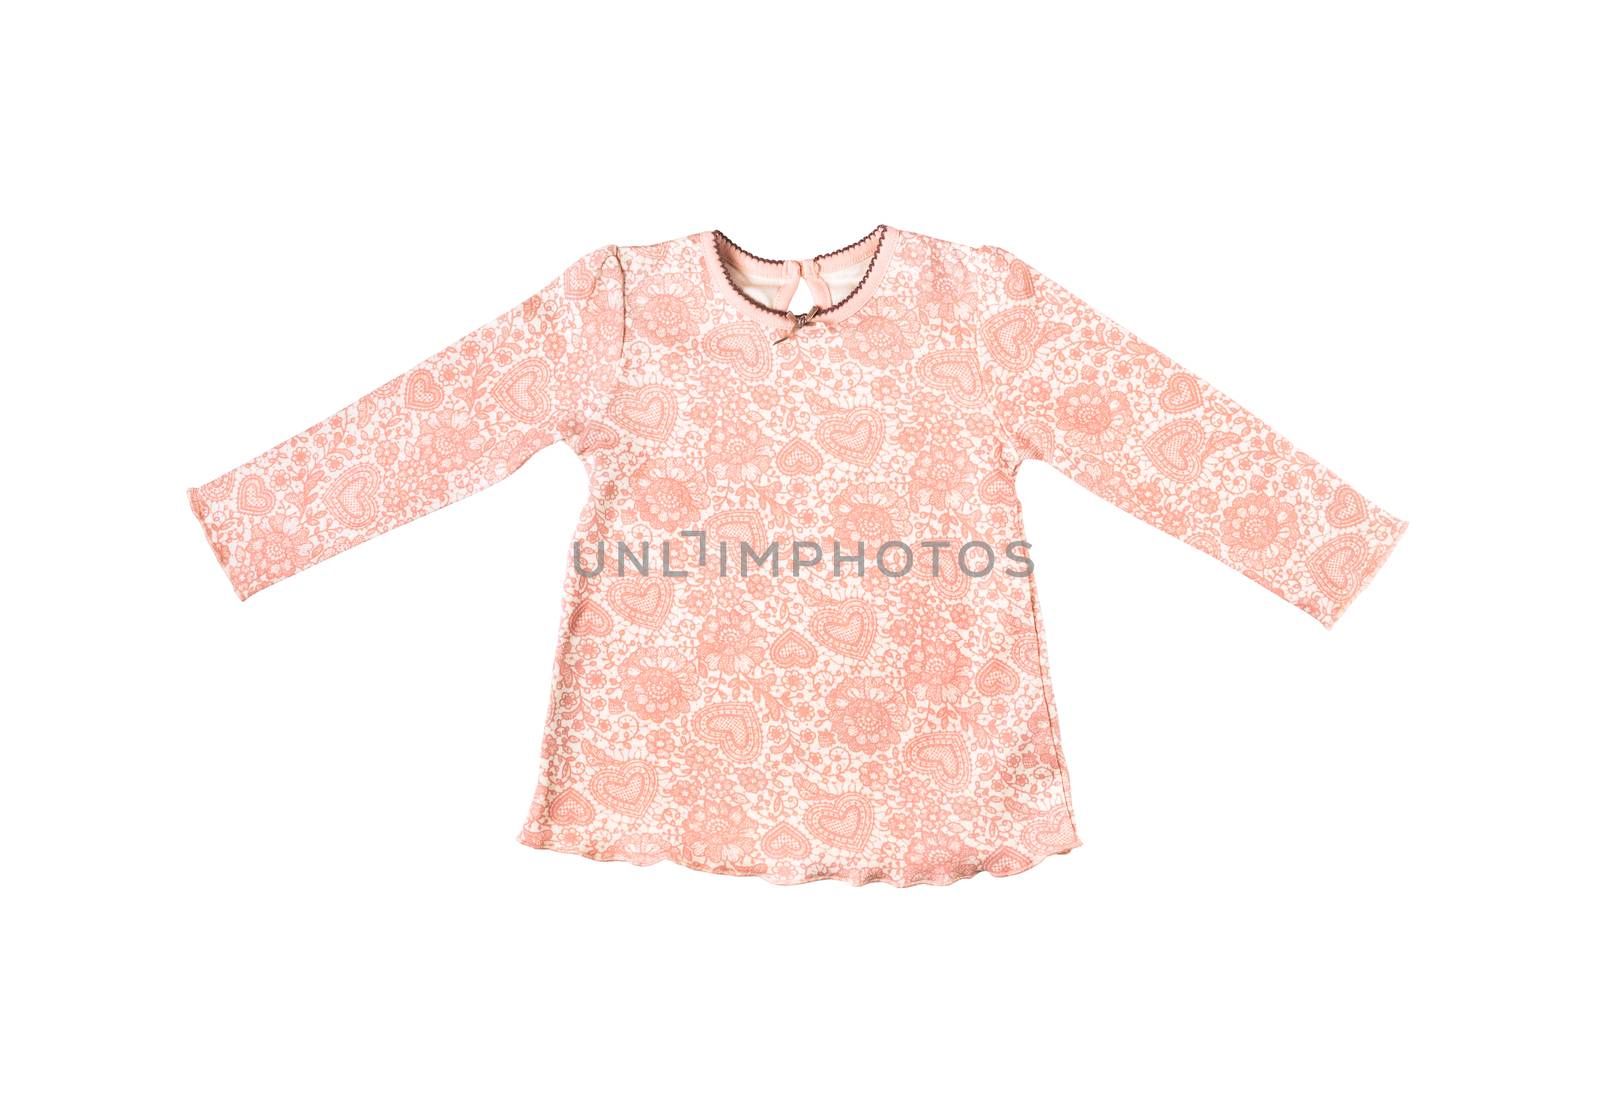 the little girl's pink tshirt with long sleeves in flowers and hearts print, cotton blouse for spring and summer wardrobe isolated on white background